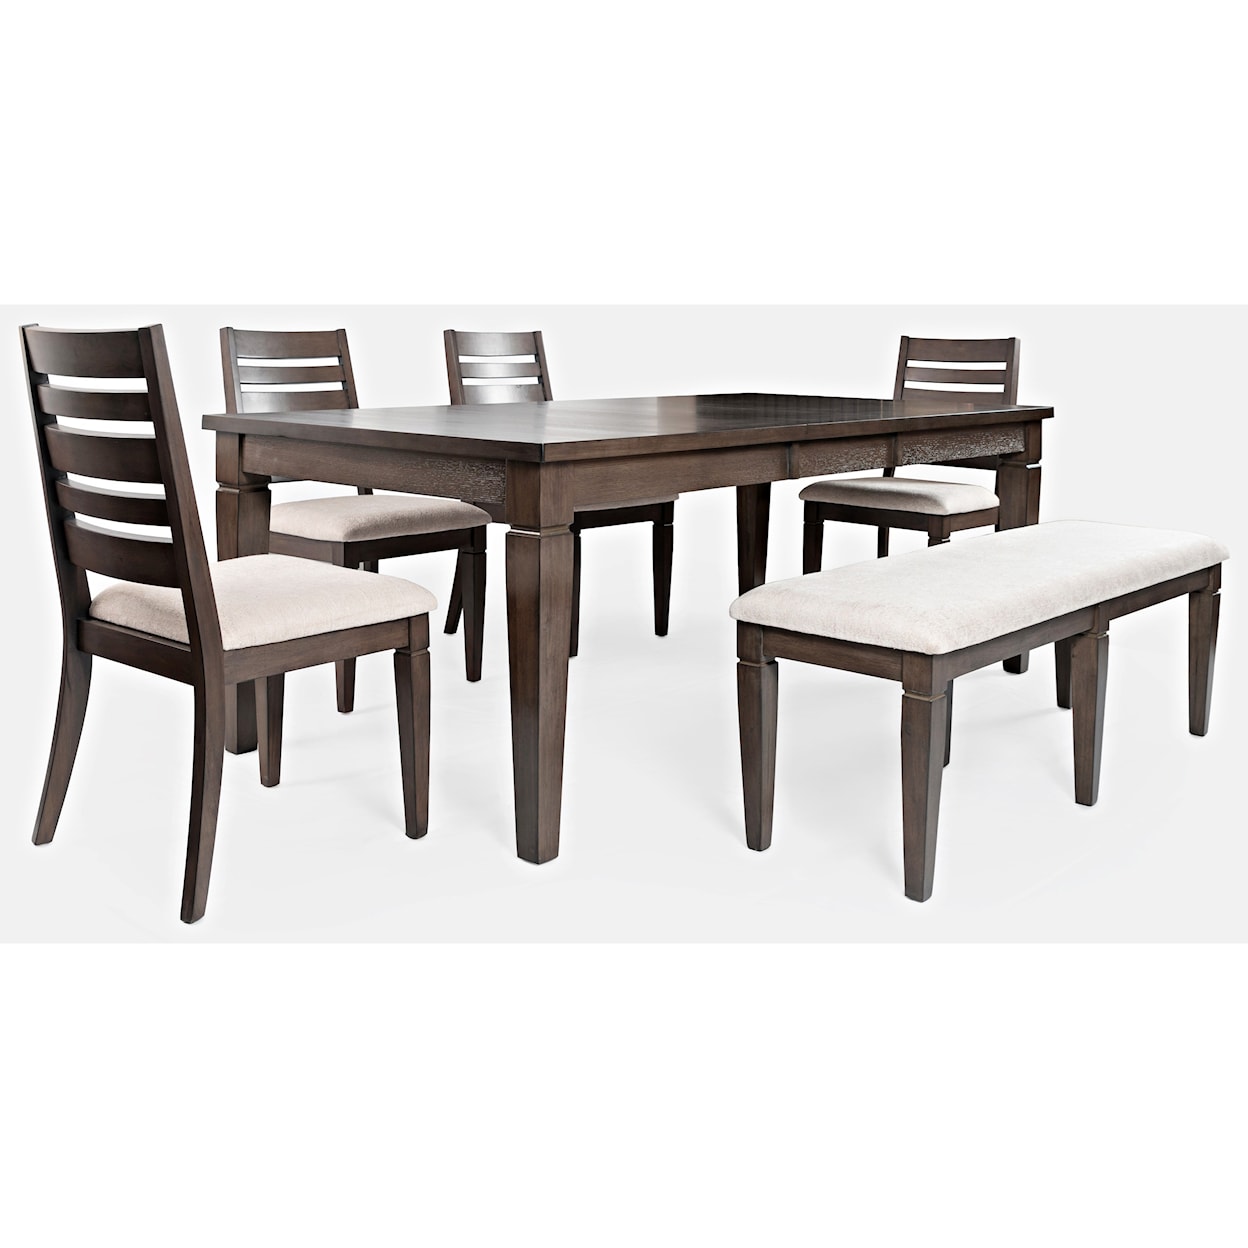 VFM Signature Lincoln Square Table and Chair Set with Bench